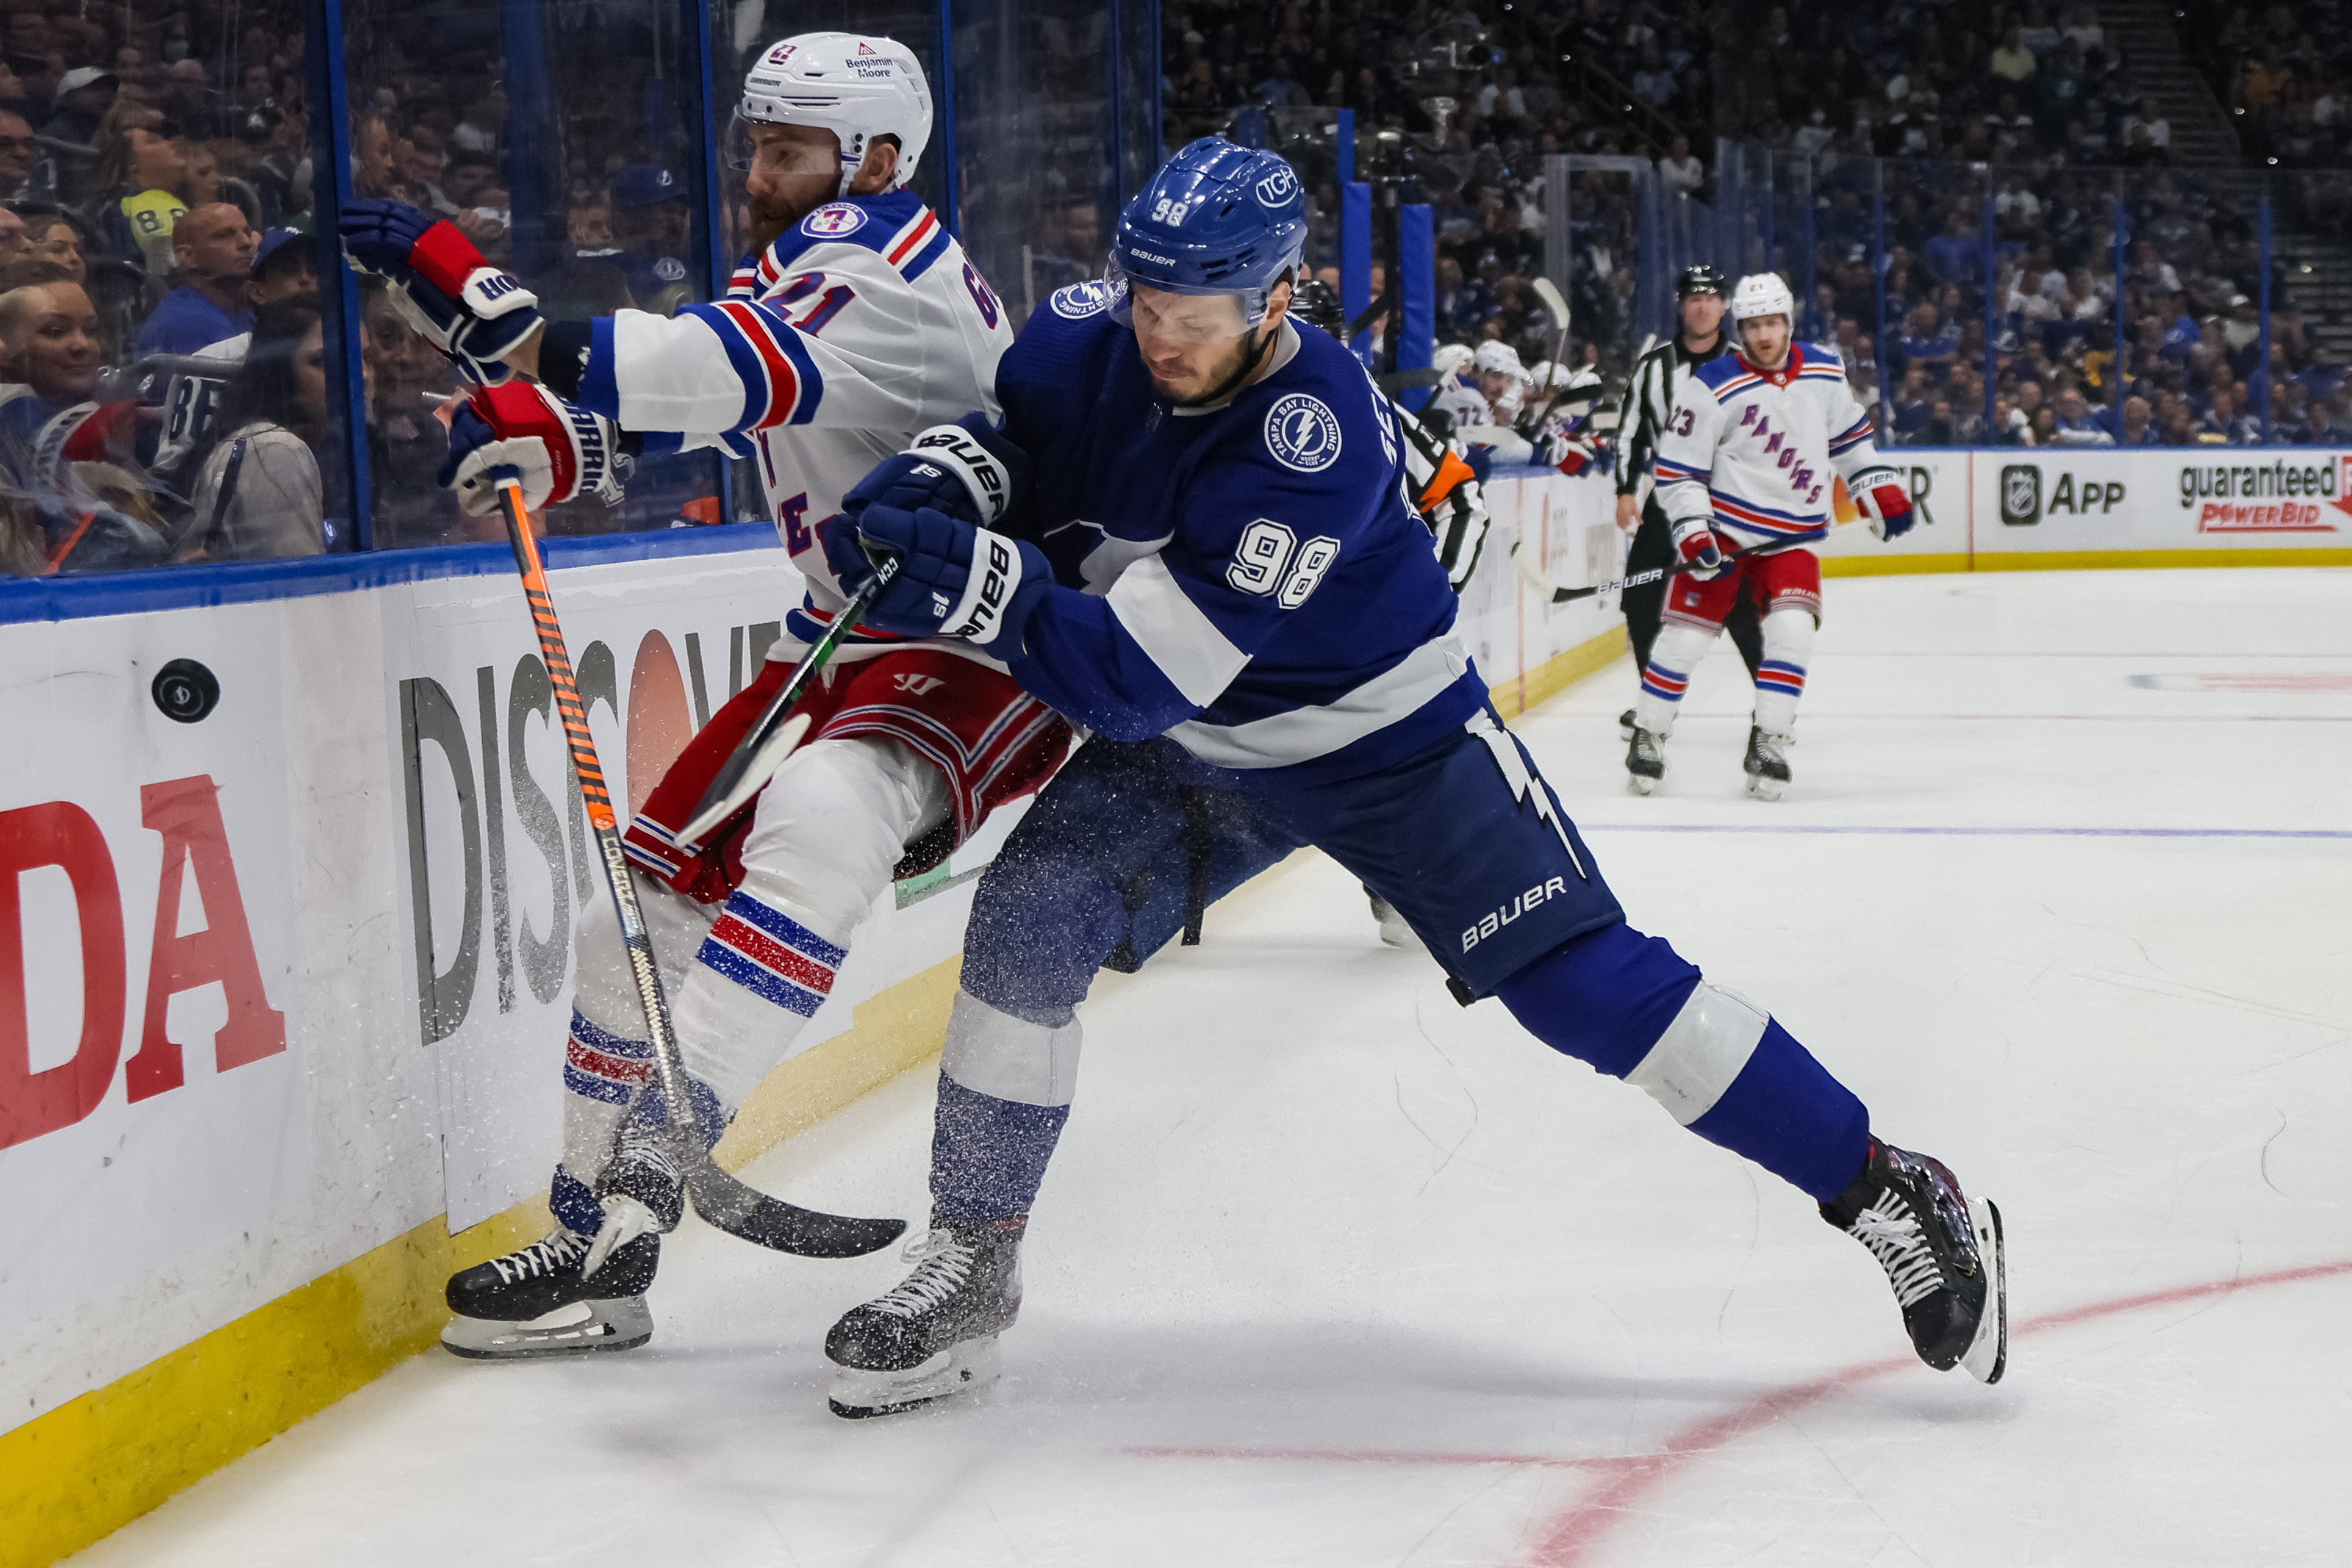 Mikhail Sergachev excited to get deal done with Lightning